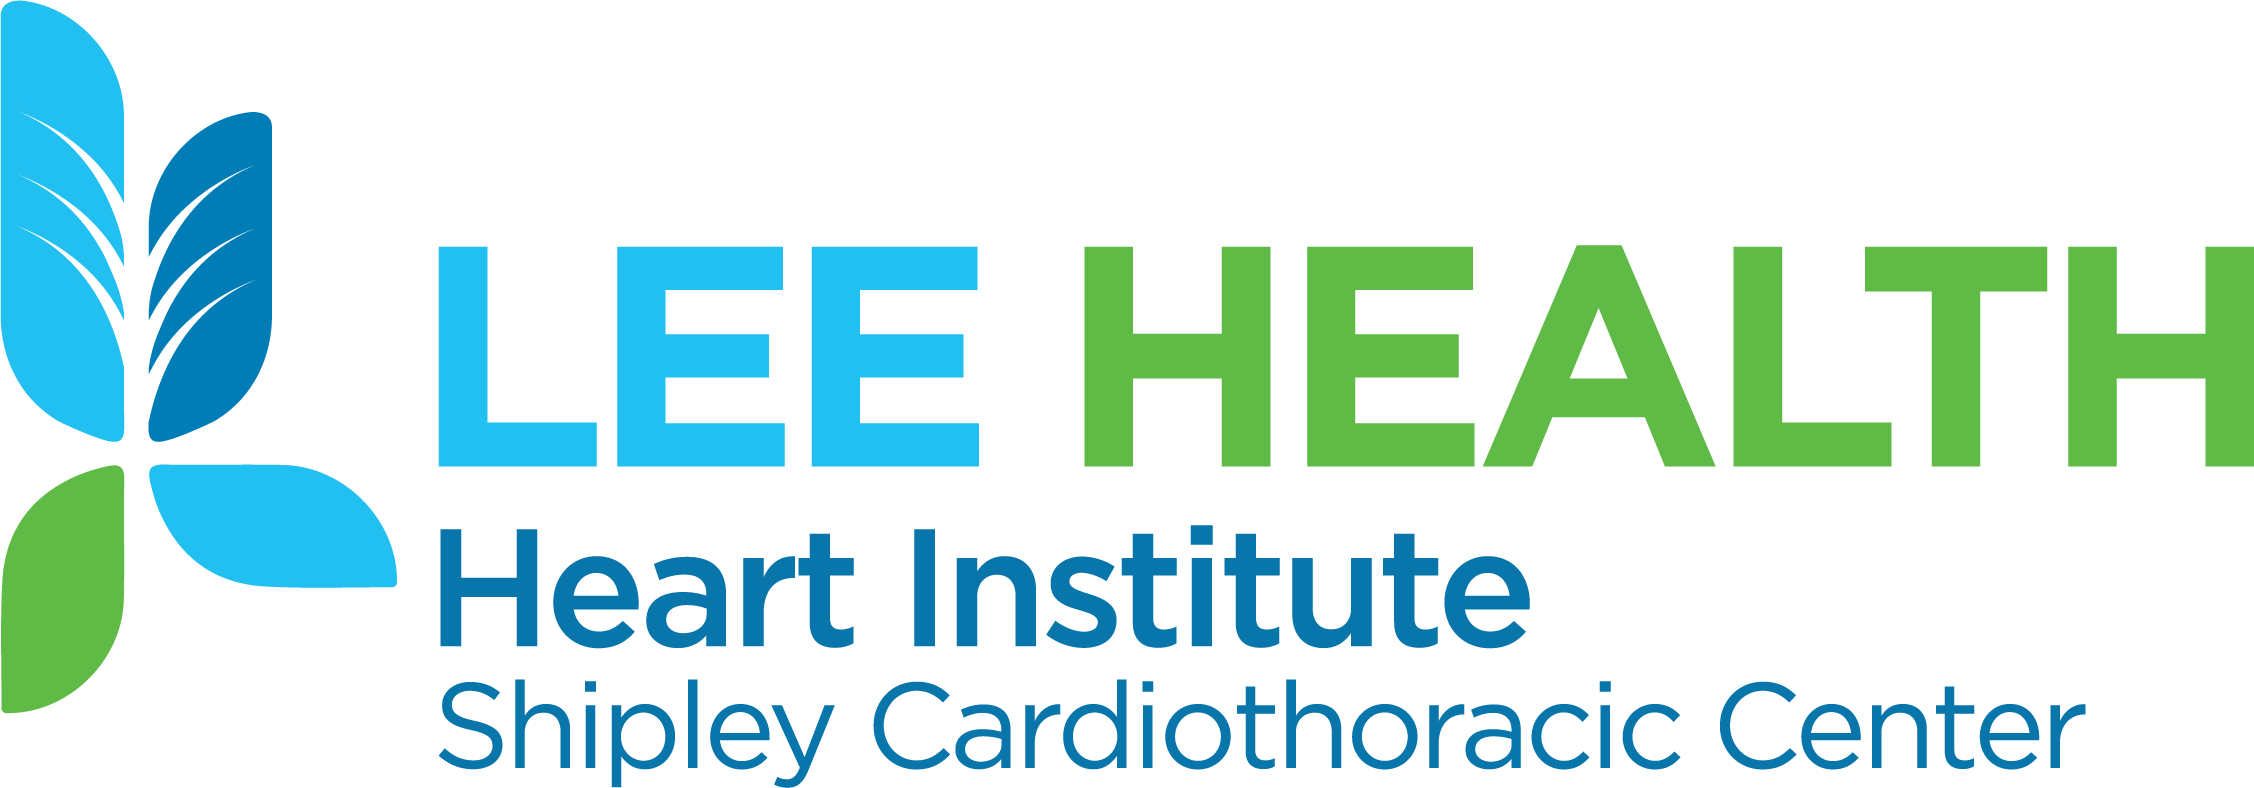 Lee Health Heart Institute Shipley Cardiothoracic Center